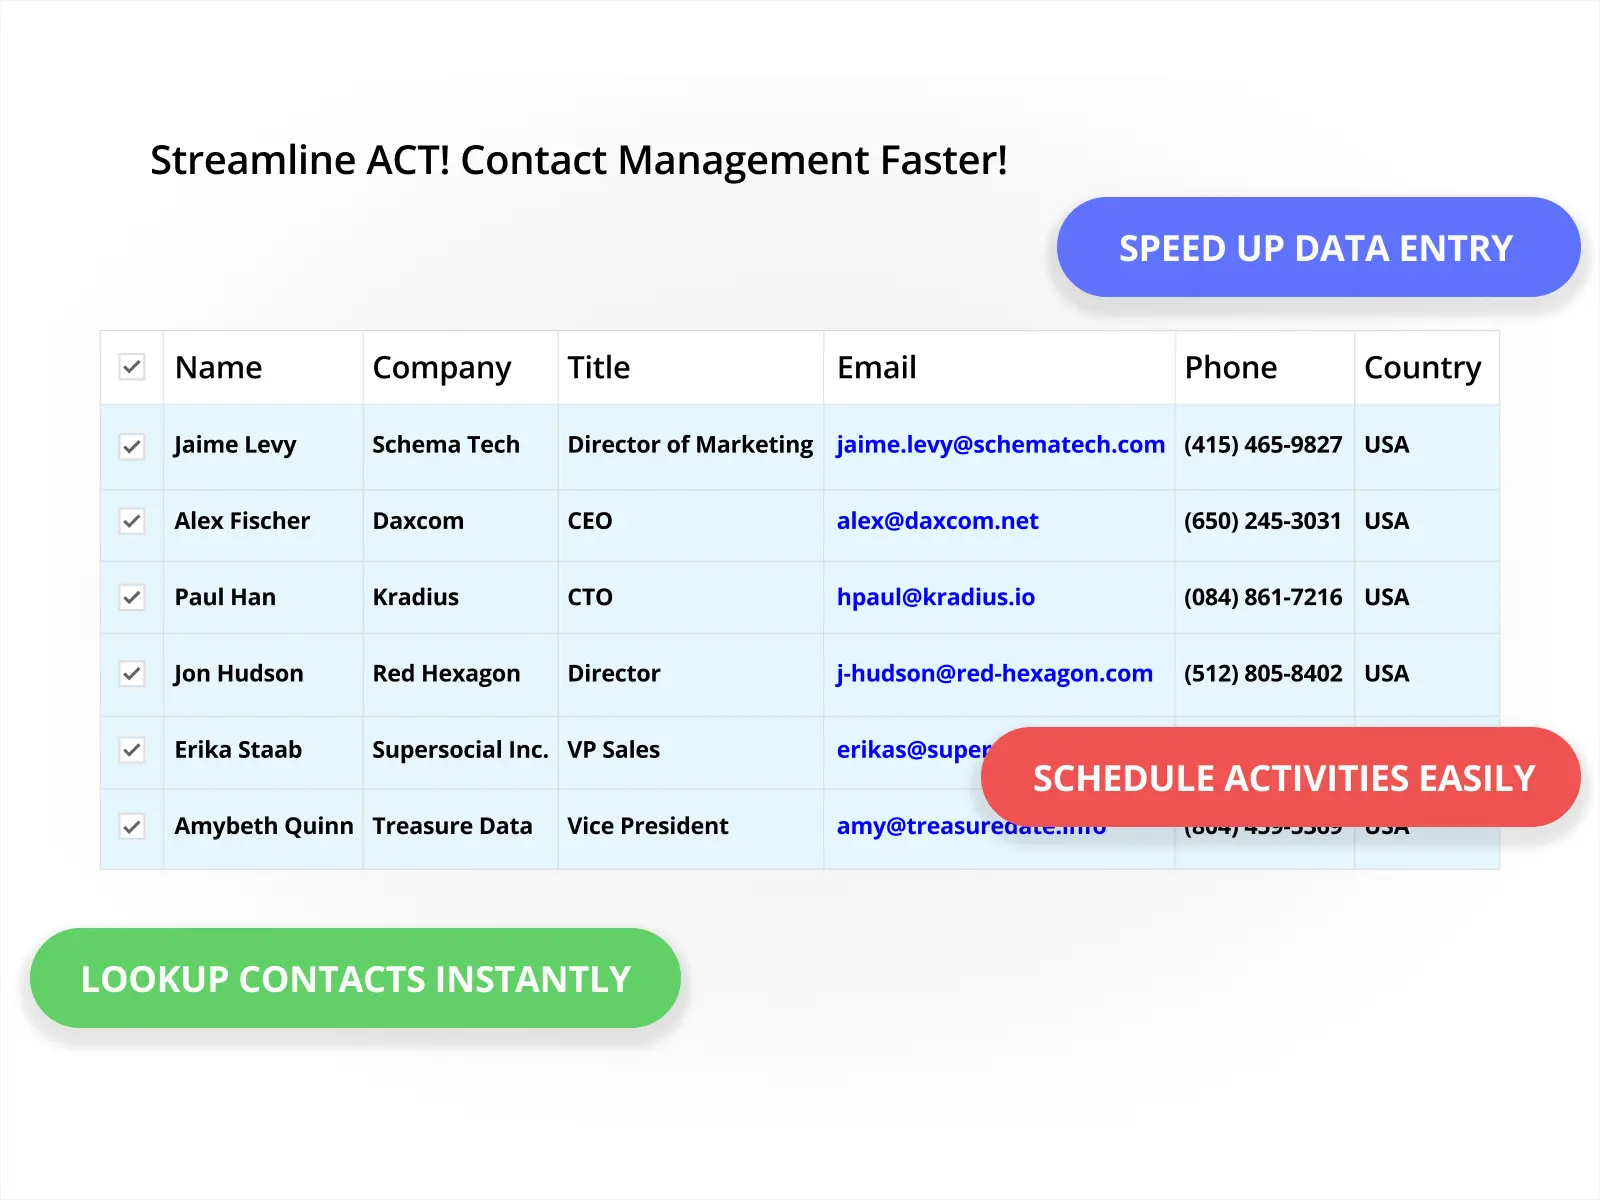 The smartest way to speedup data entry in act!